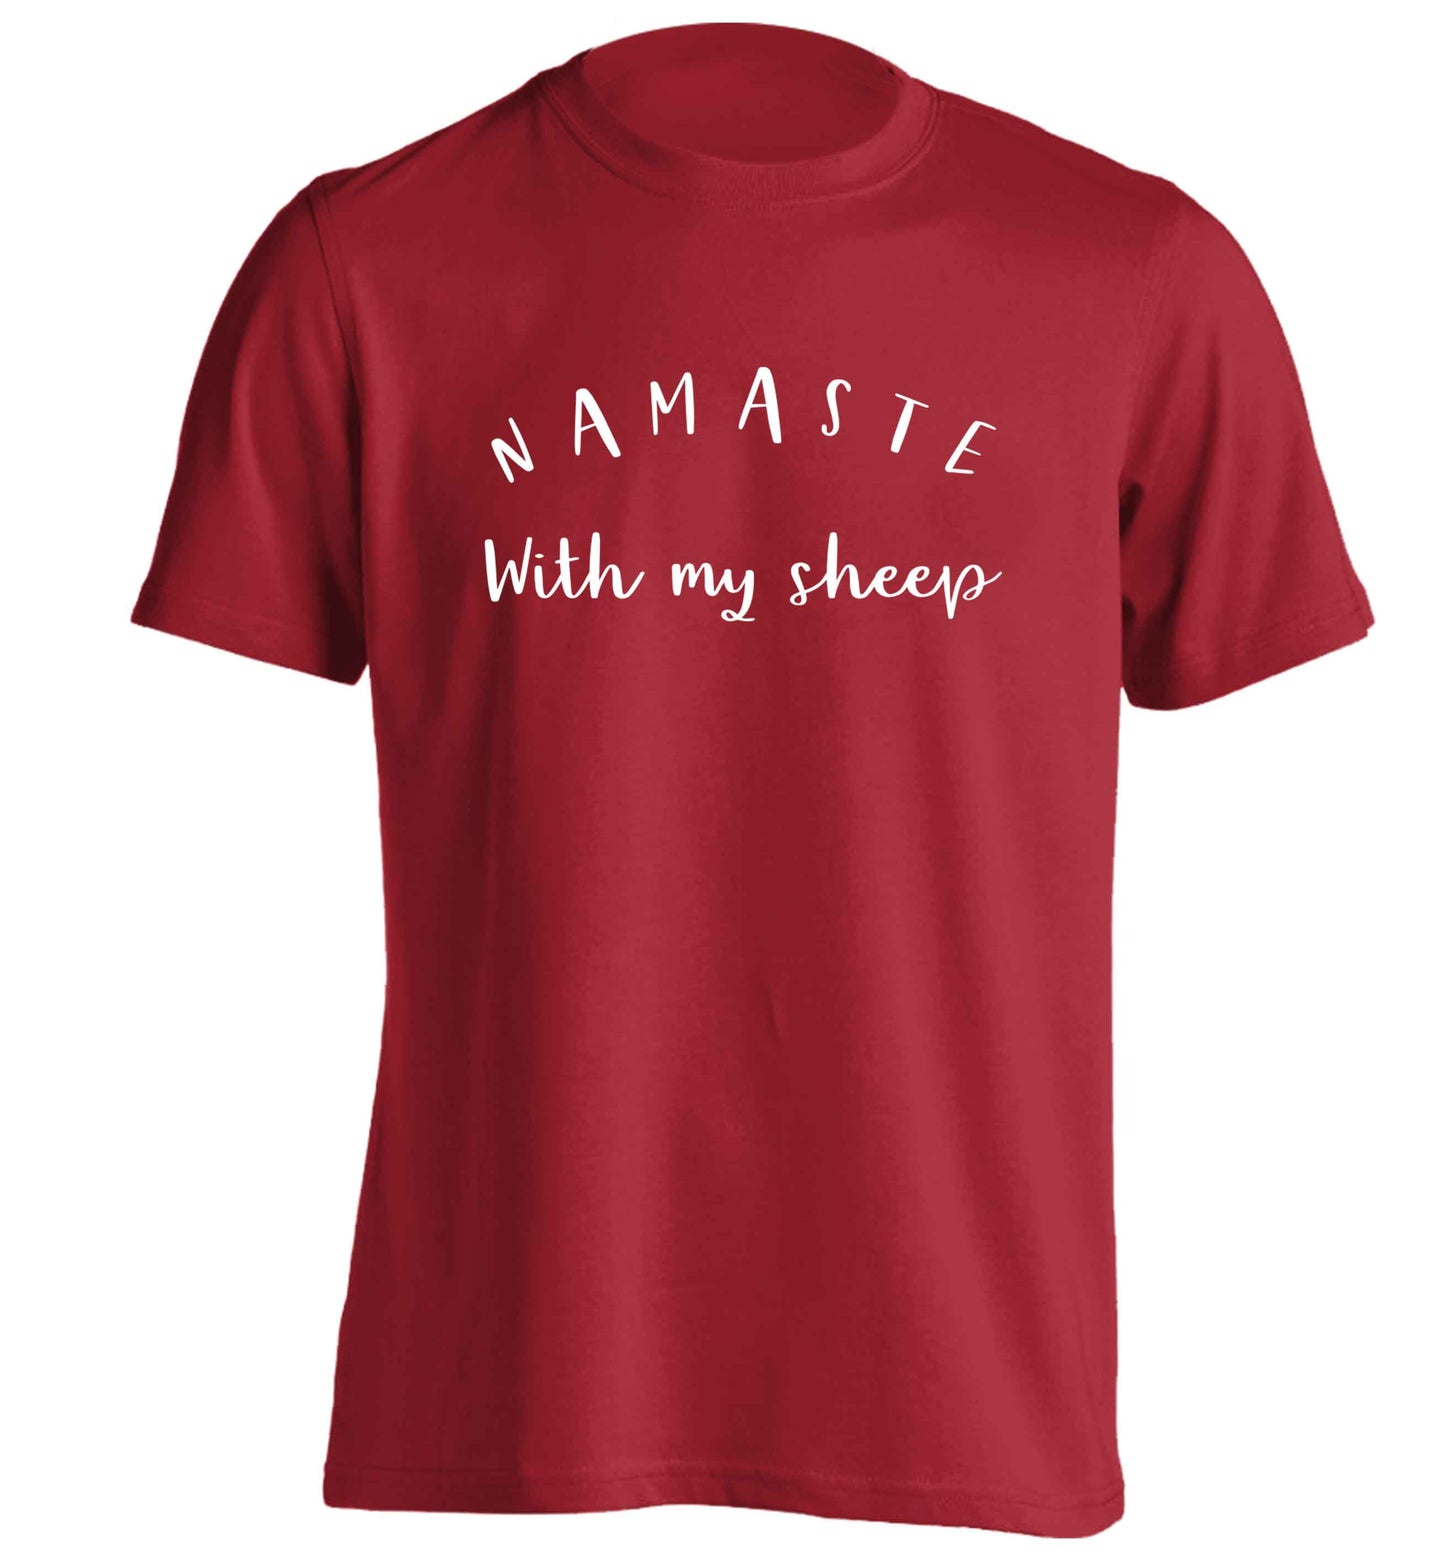 Namaste with my sheep adults unisex red Tshirt 2XL